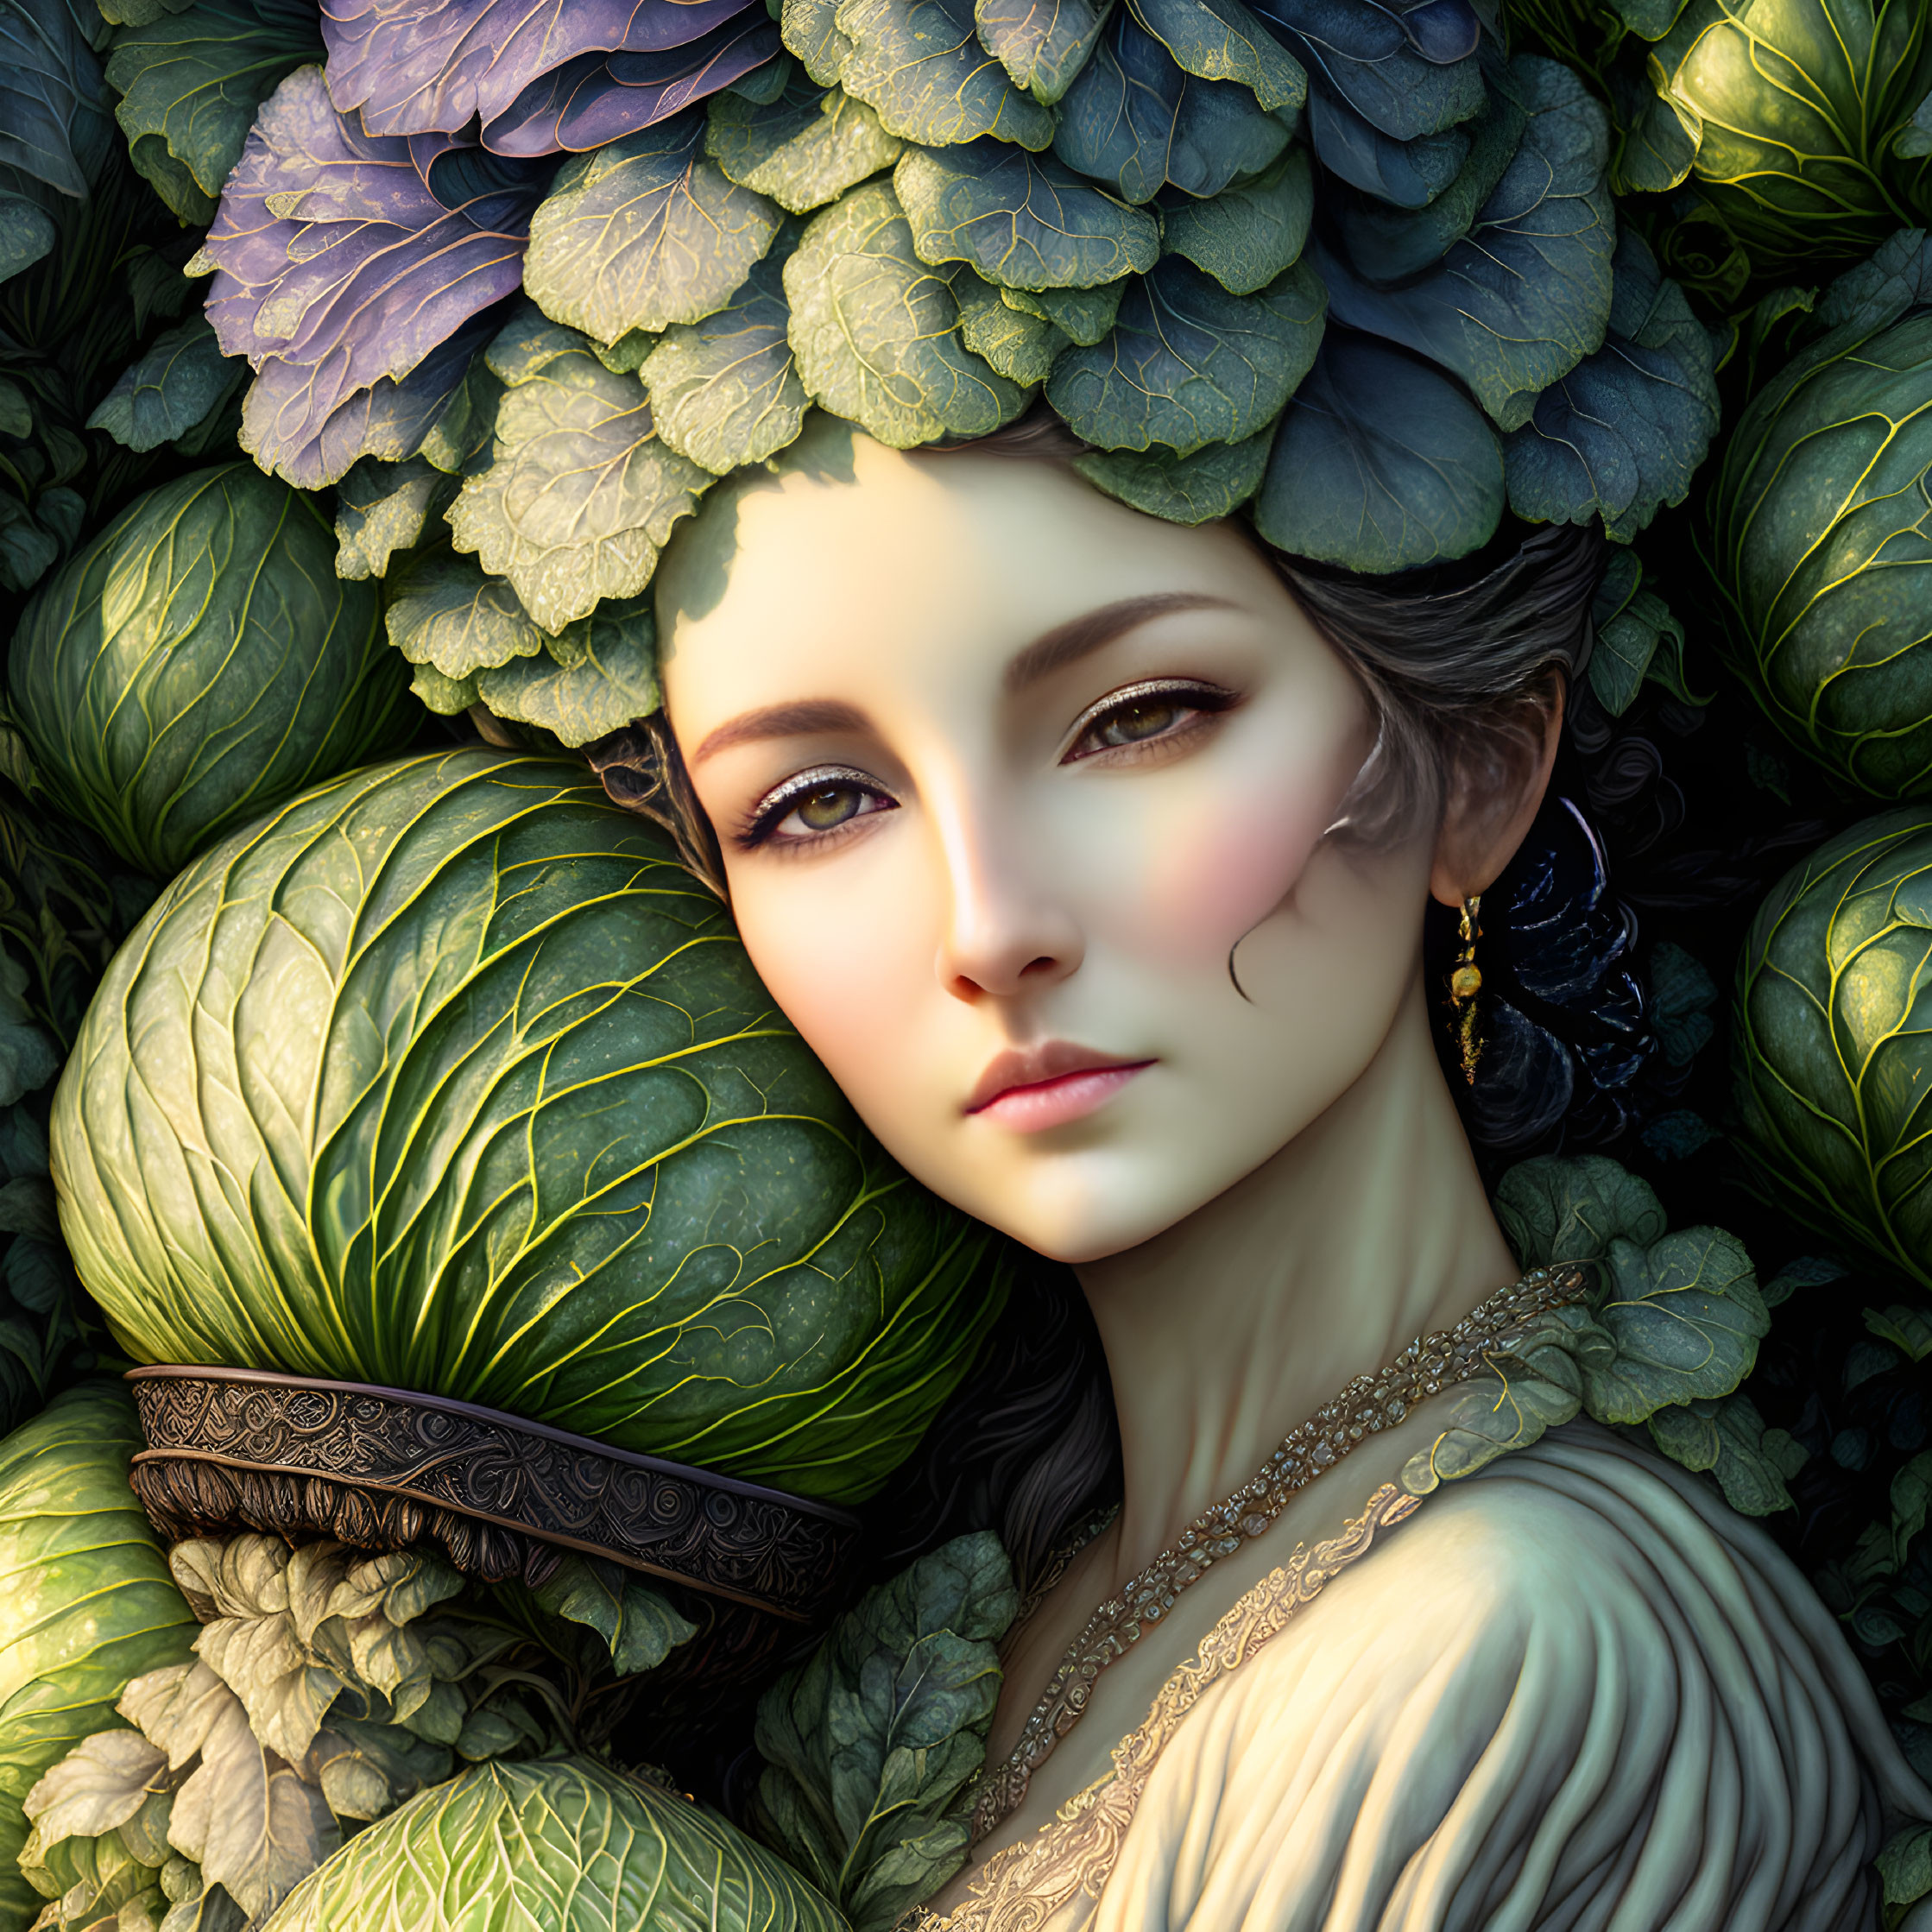 Digital artwork: Woman in serene expression surrounded by cabbage and foliage